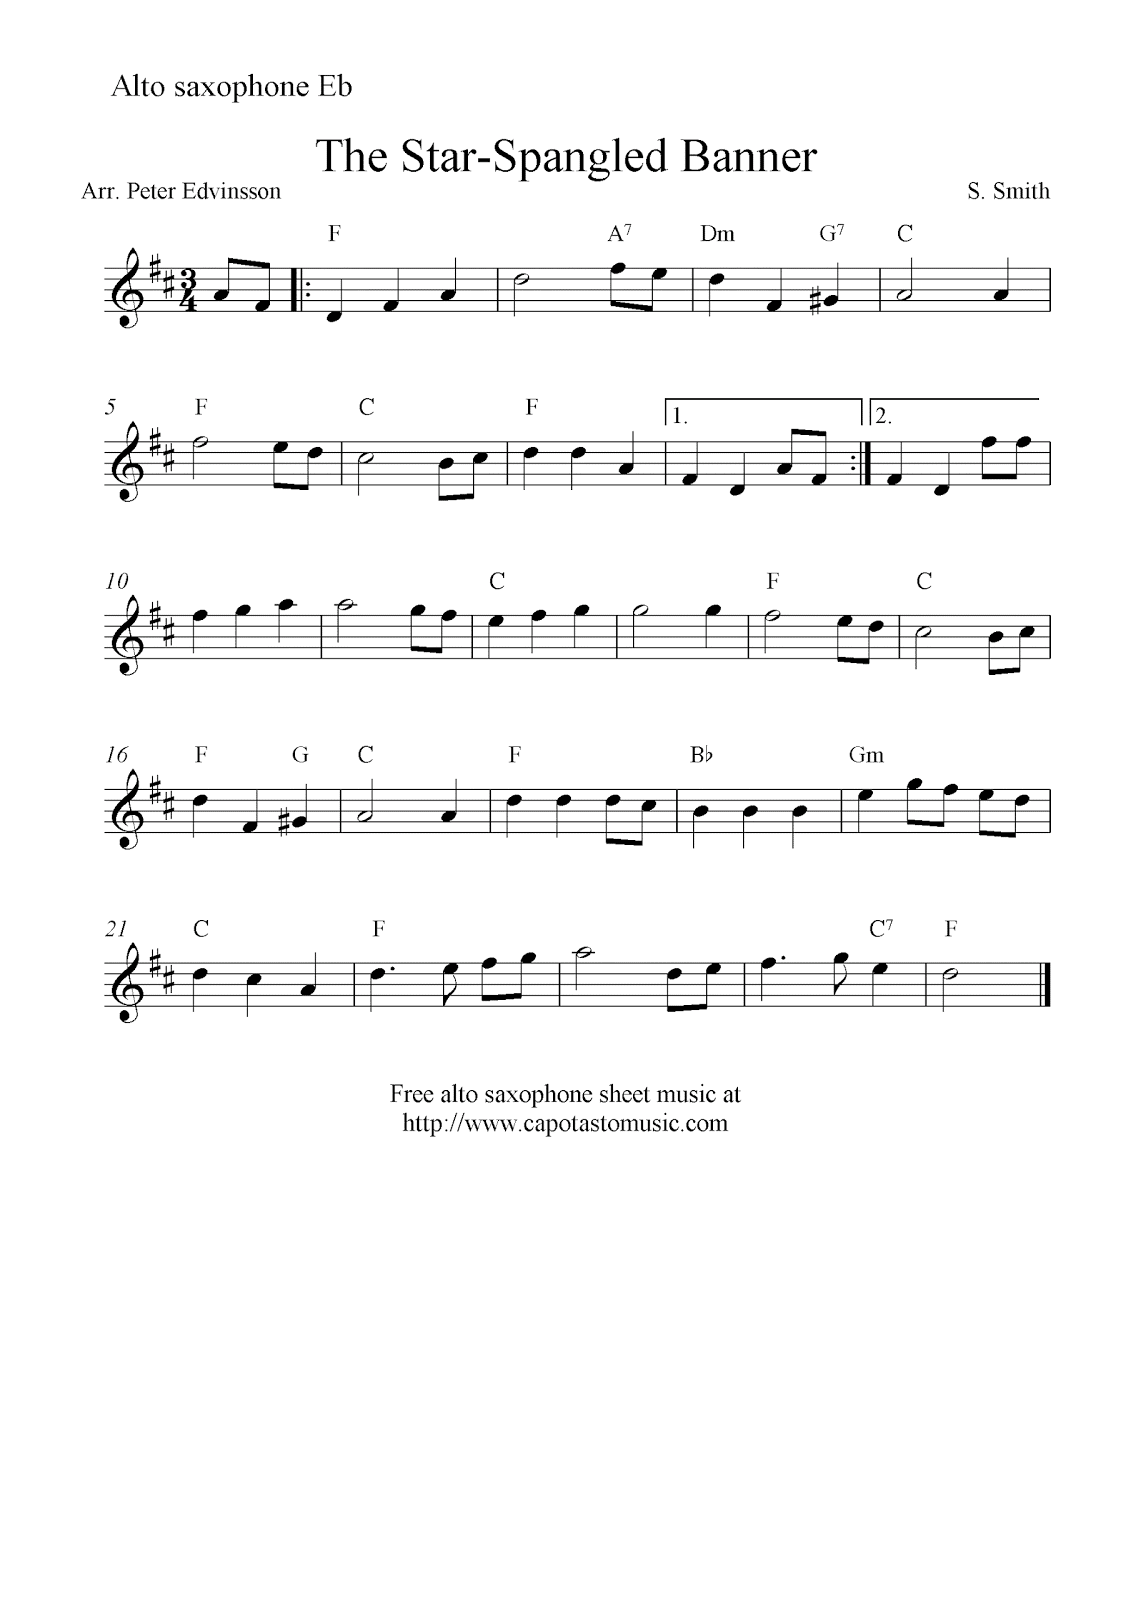 The Star Spangled Banner Free Alto Saxophone Sheet Music Notes